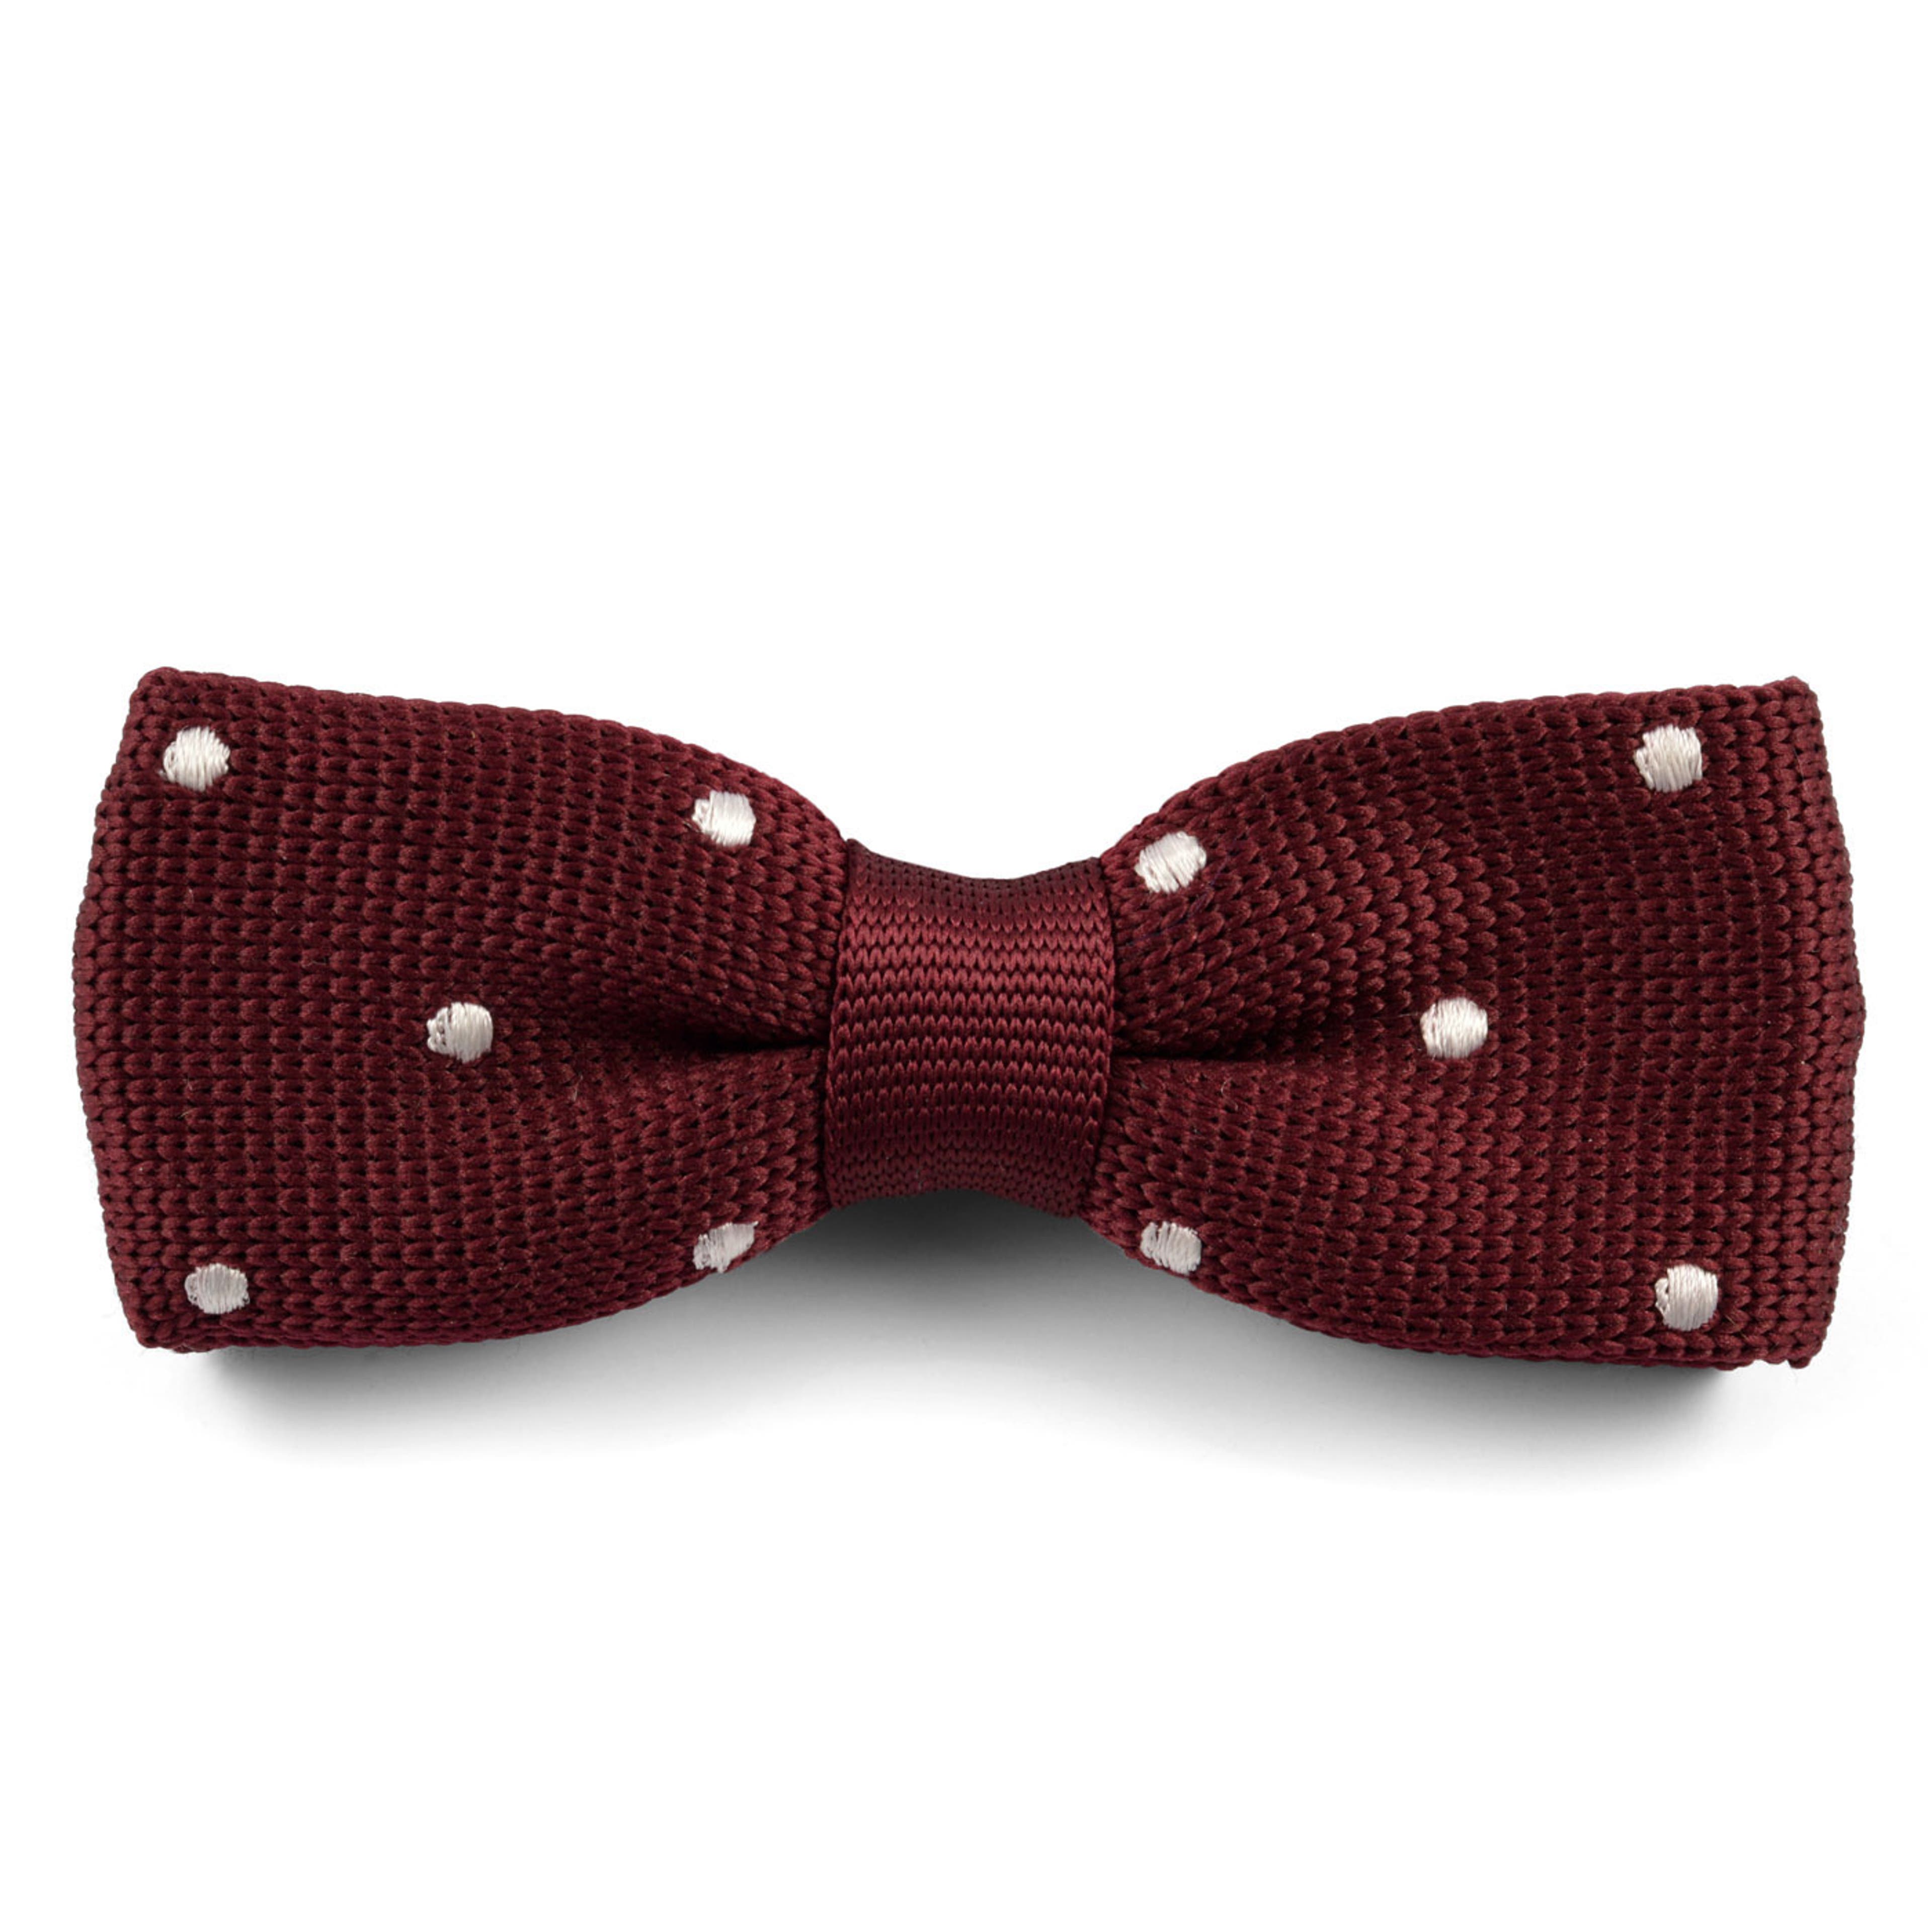 Burgundy & Whited Dotted Knitted Pre-Tied Bow Tie